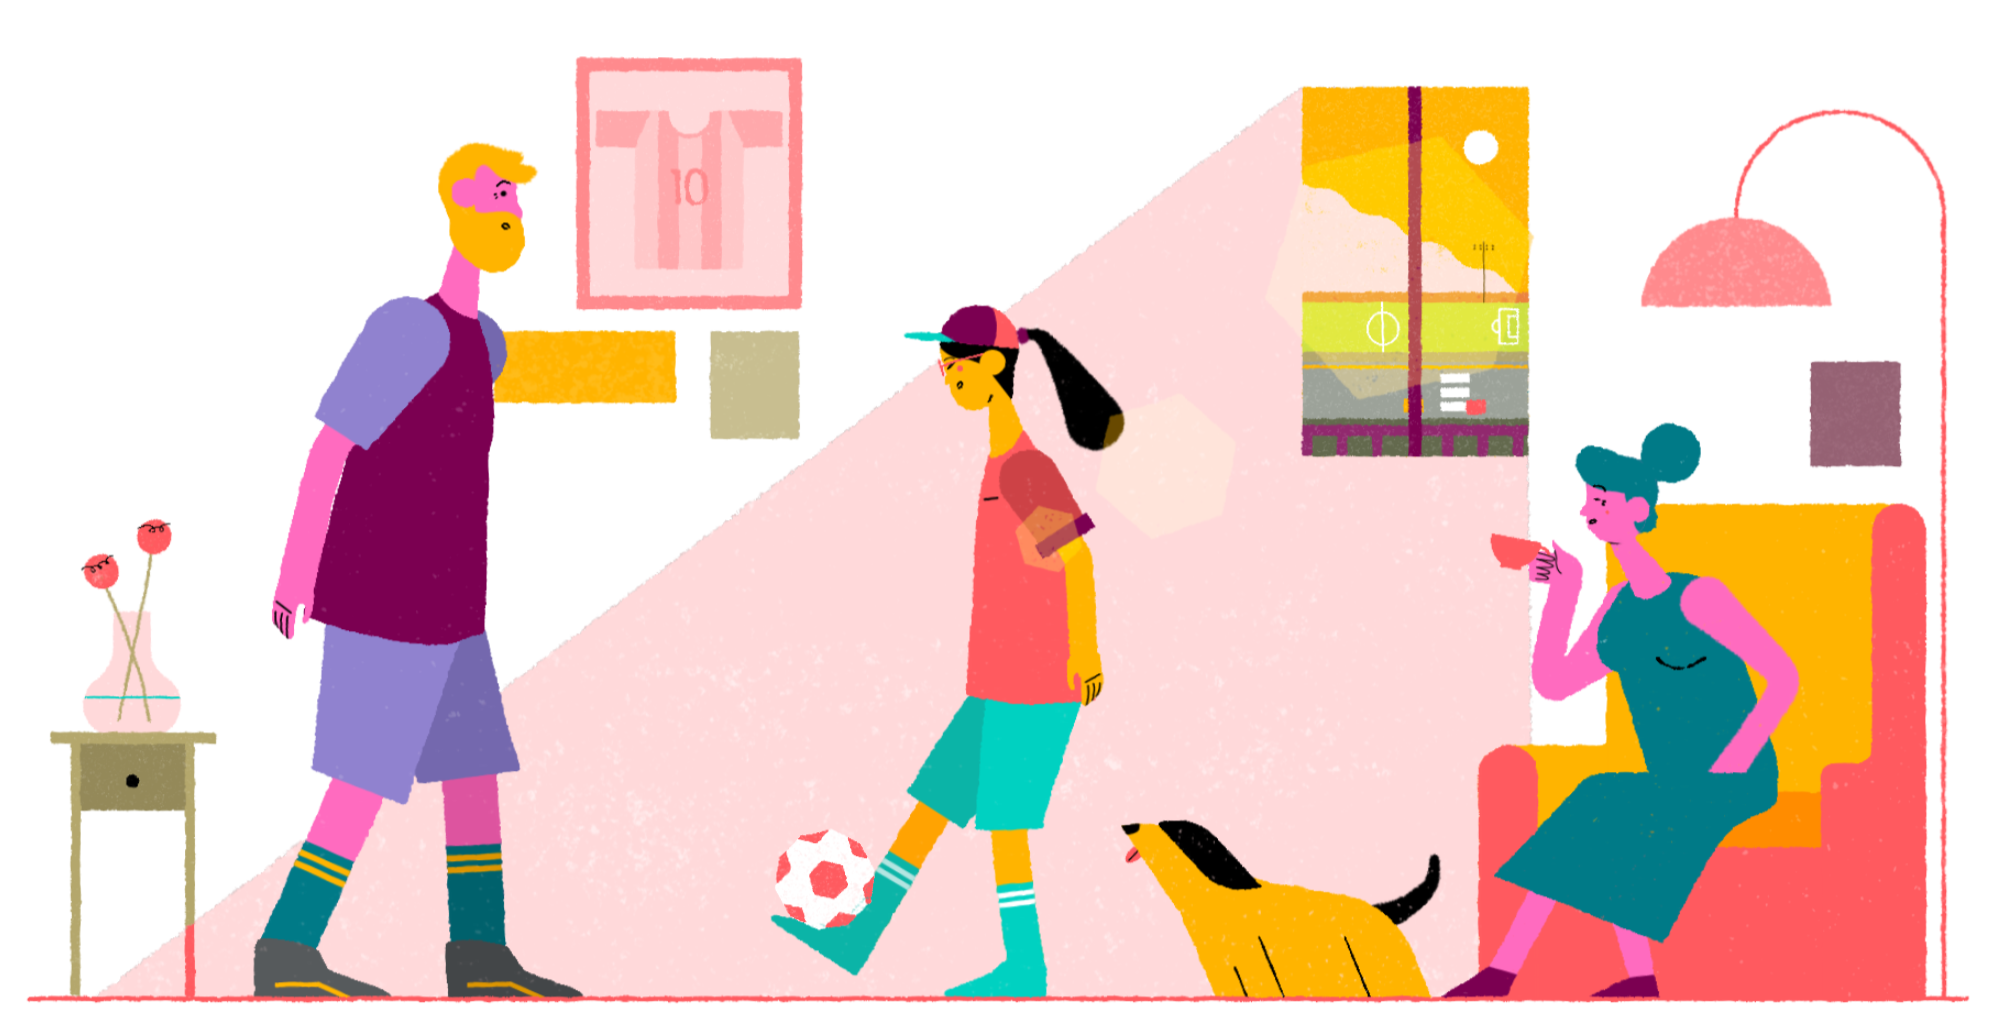 An illustration featuring the Airbnb host and guest juggling a football inside while a dog watches and the host's wife sips on some tea.